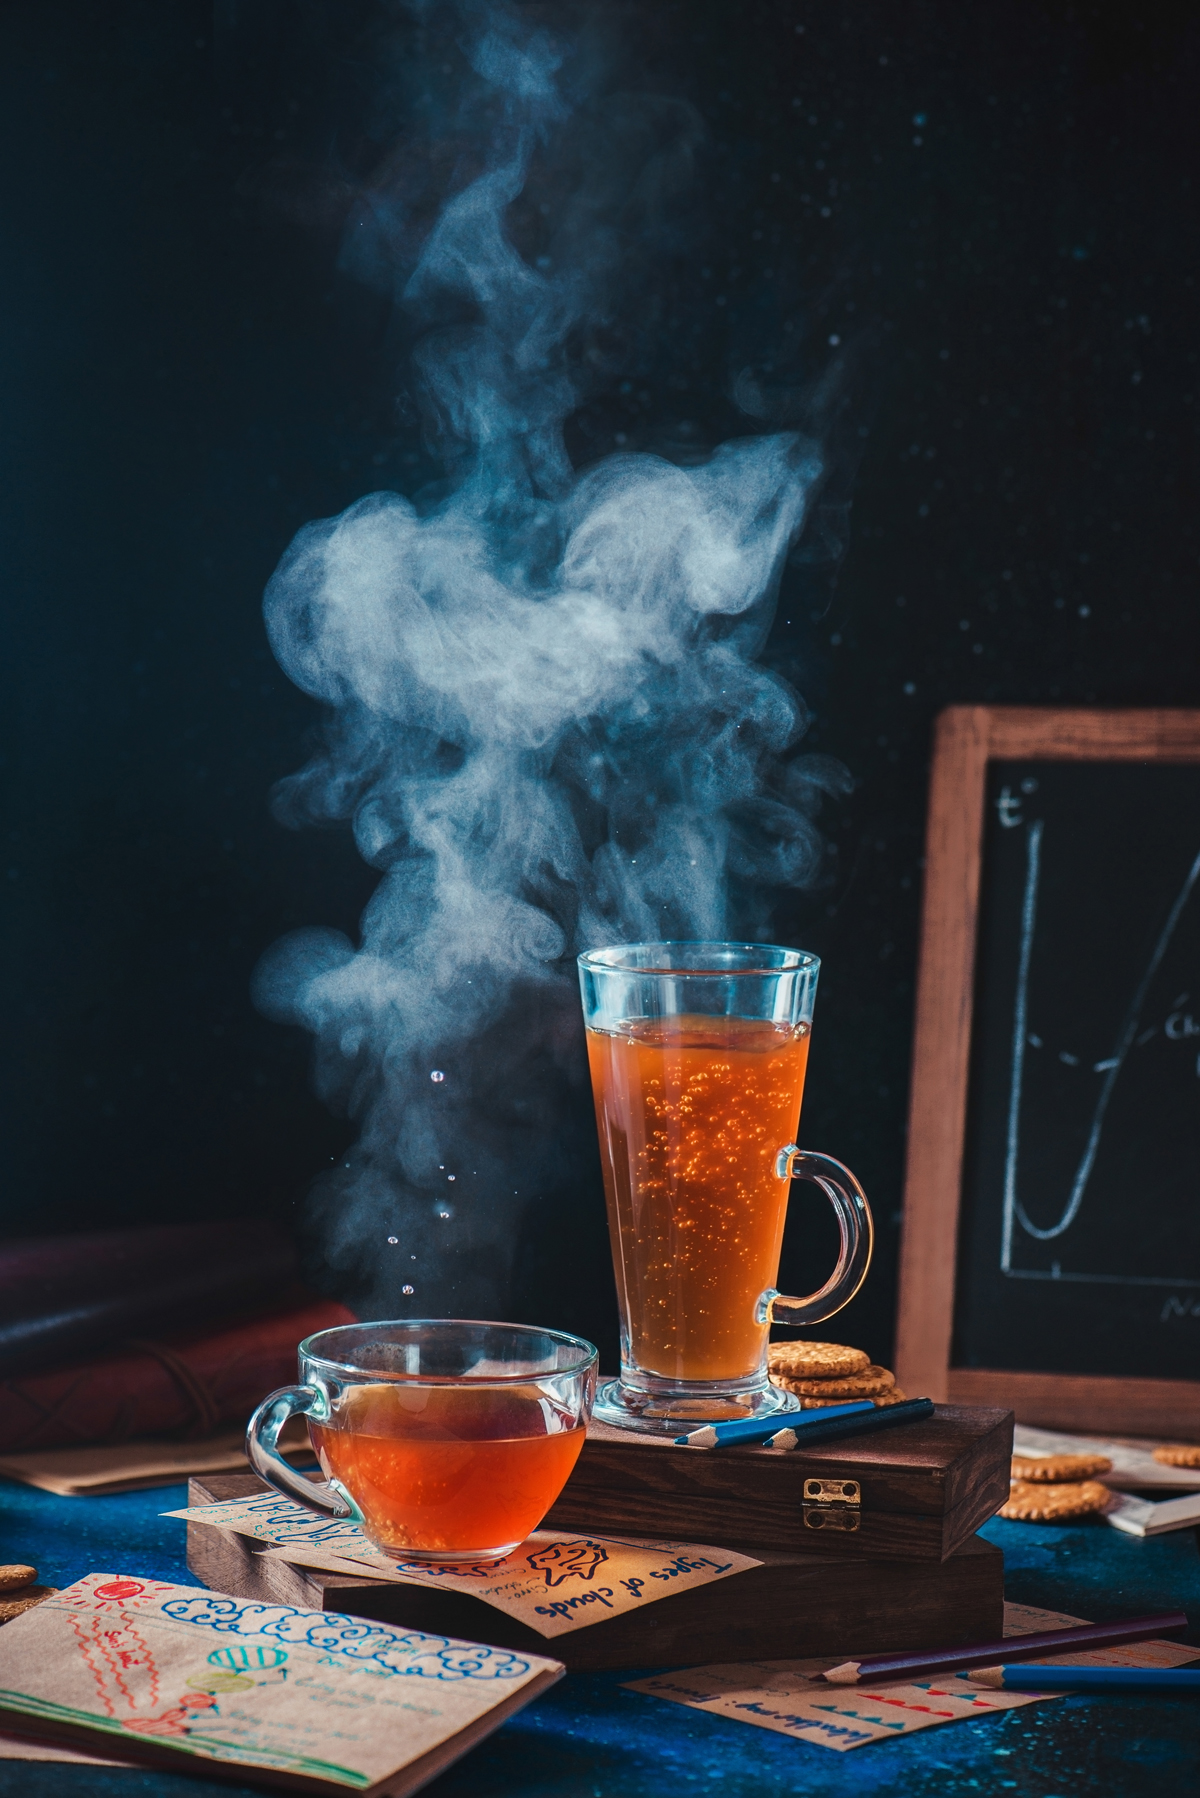 But First, Coffee: How to Photograph Steam Over Your Coffee